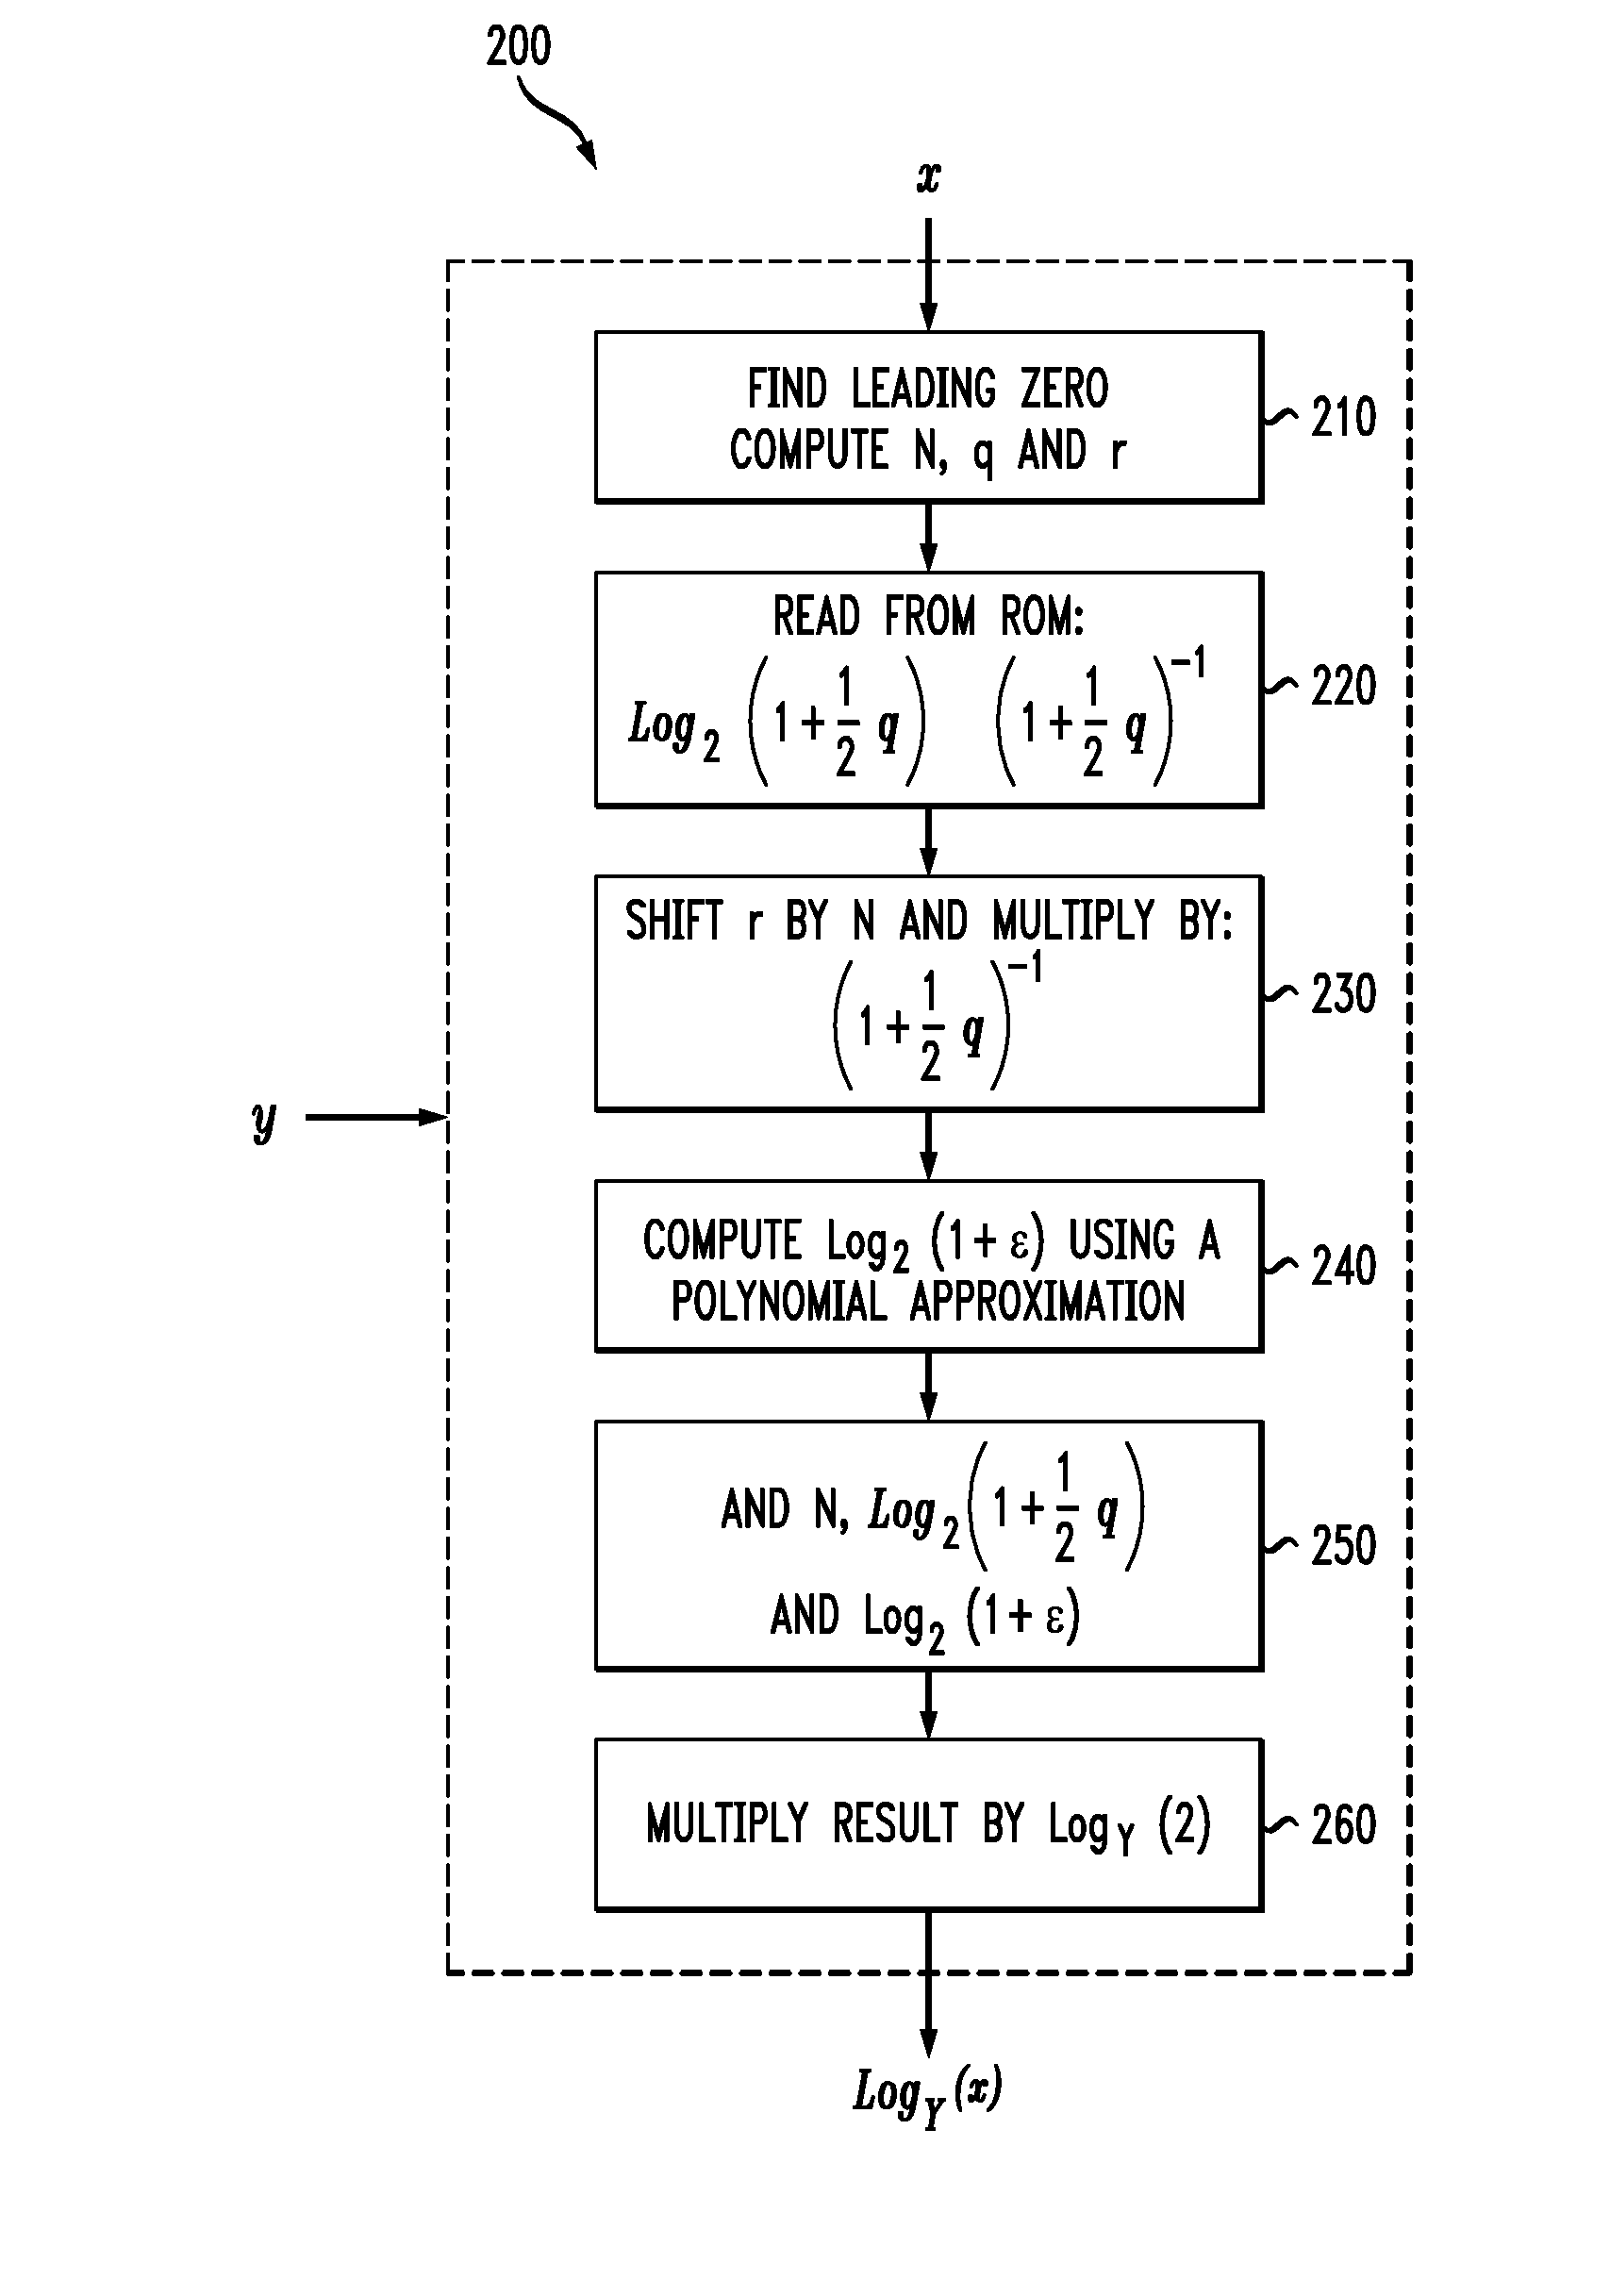 Digital Signal Processor Having Instruction Set With A Logarithm Function Using Reduced Look-Up Table